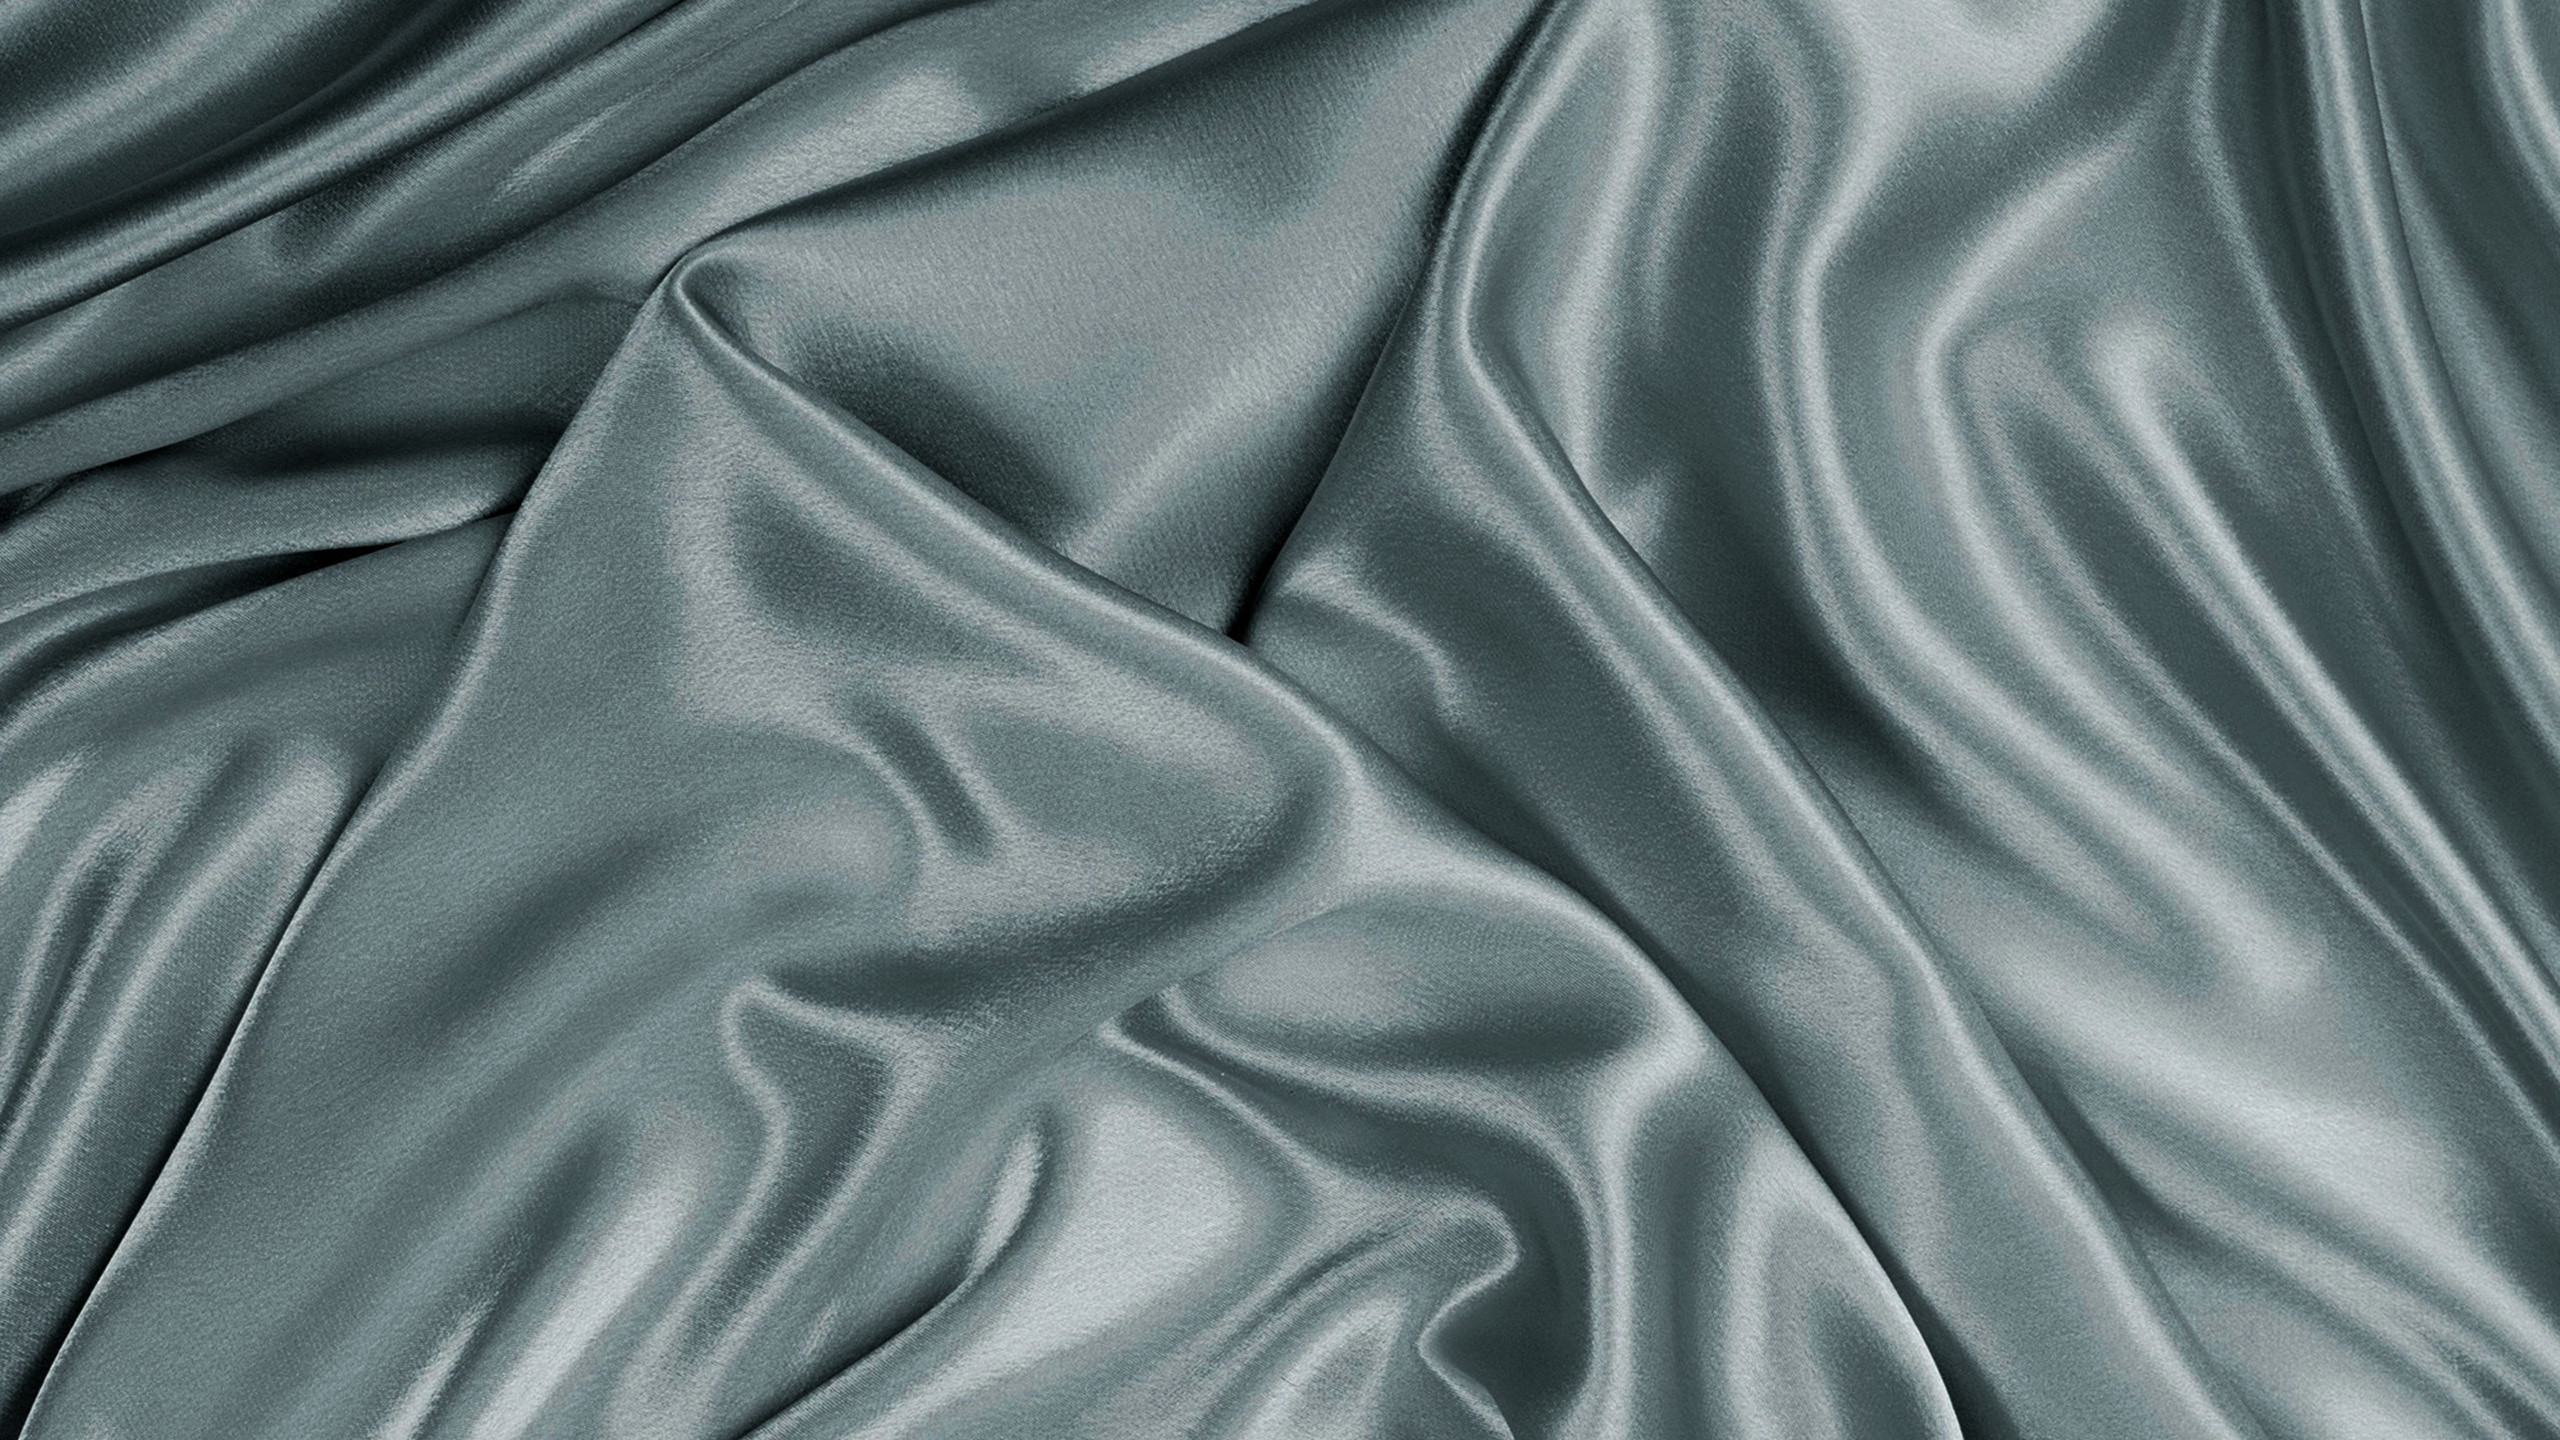 2560x1440 Silk, Textile, Woven Fabric, Satin, Material Wallpaper in   Resolution